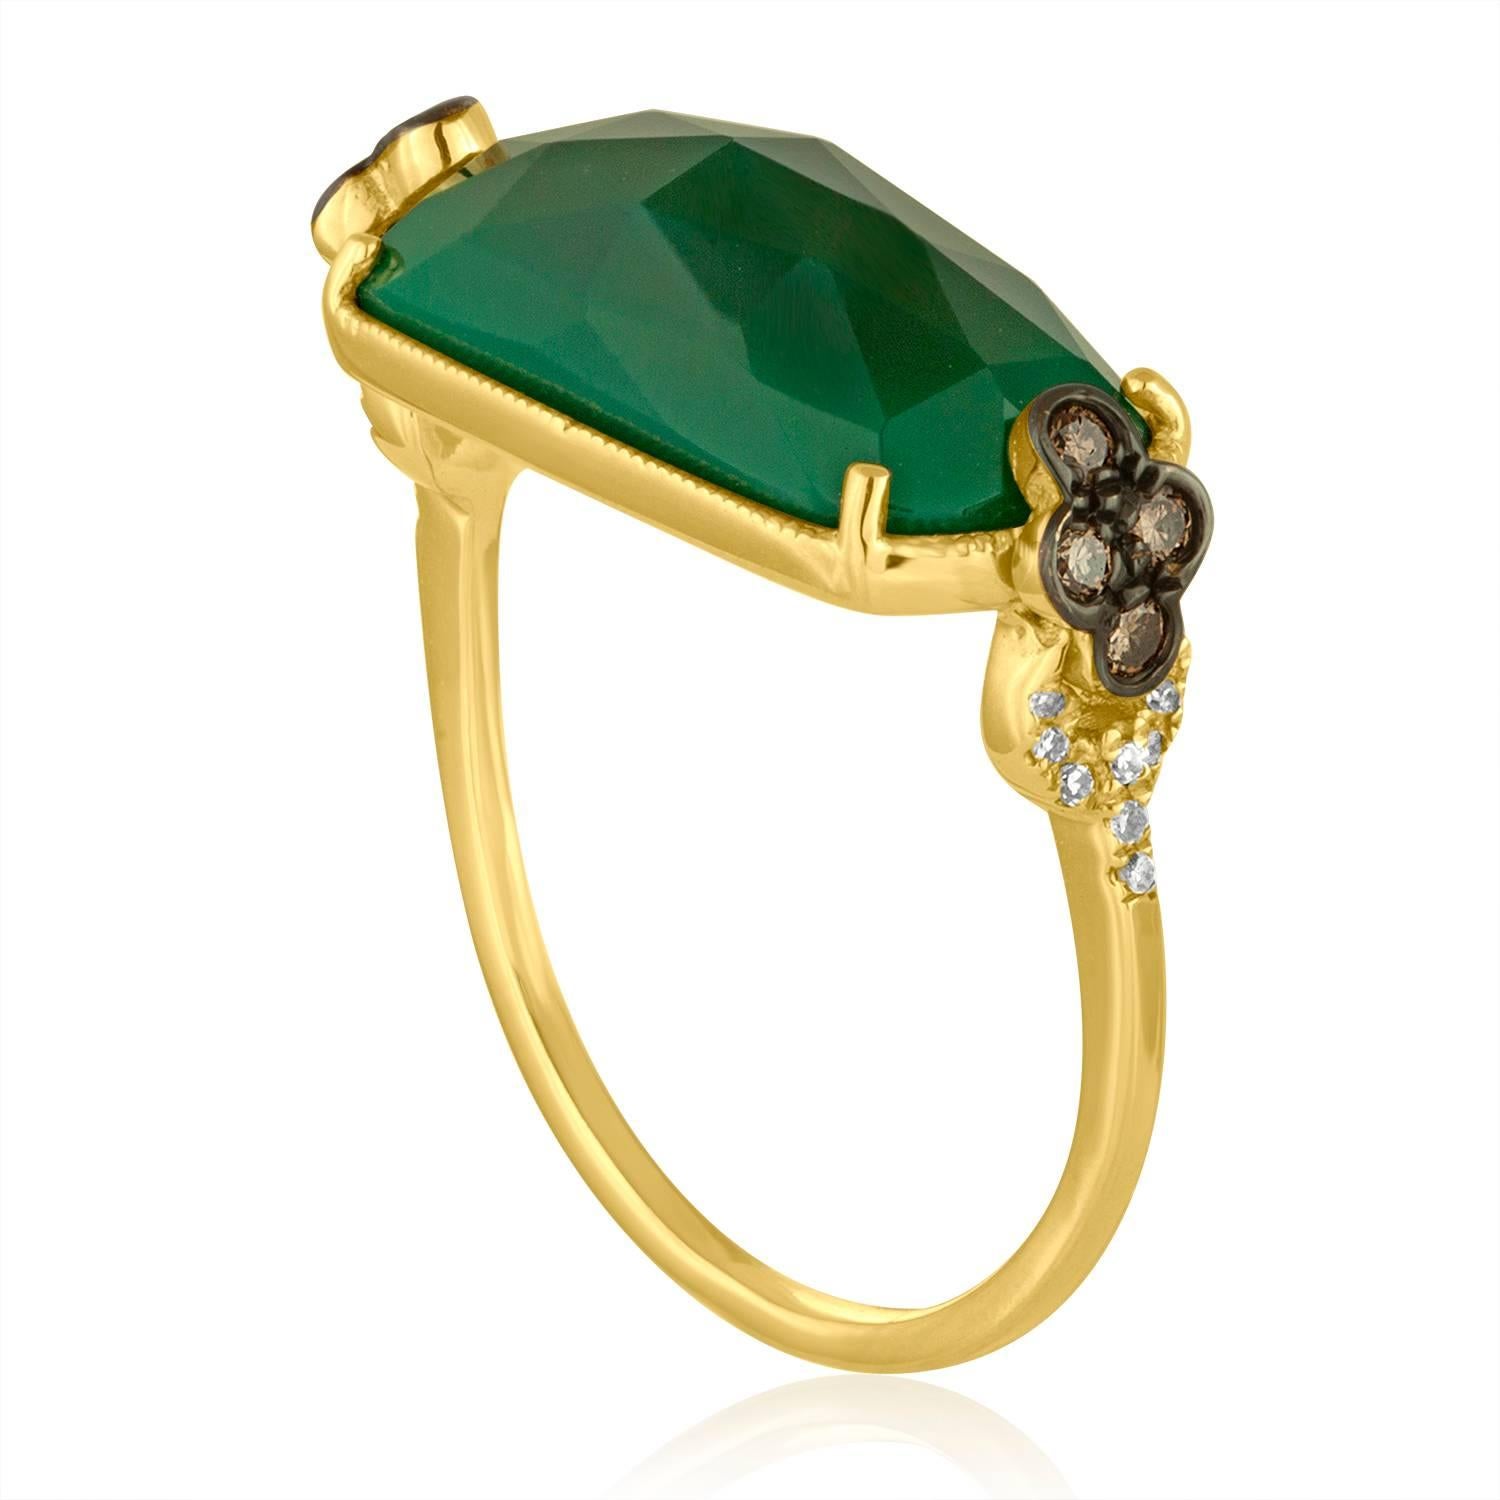 Beautiful and Fun Ring
The ring is 14K Yellow Gold
There are 0.04 Carats In White Diamonds J/K SI
There are 0.11 Carats In Brown / Champagne Diamonds SI
The Center Stone is a Faceted Cabochon Green Agate 5.35 Carats
The ring measures on top 13/16